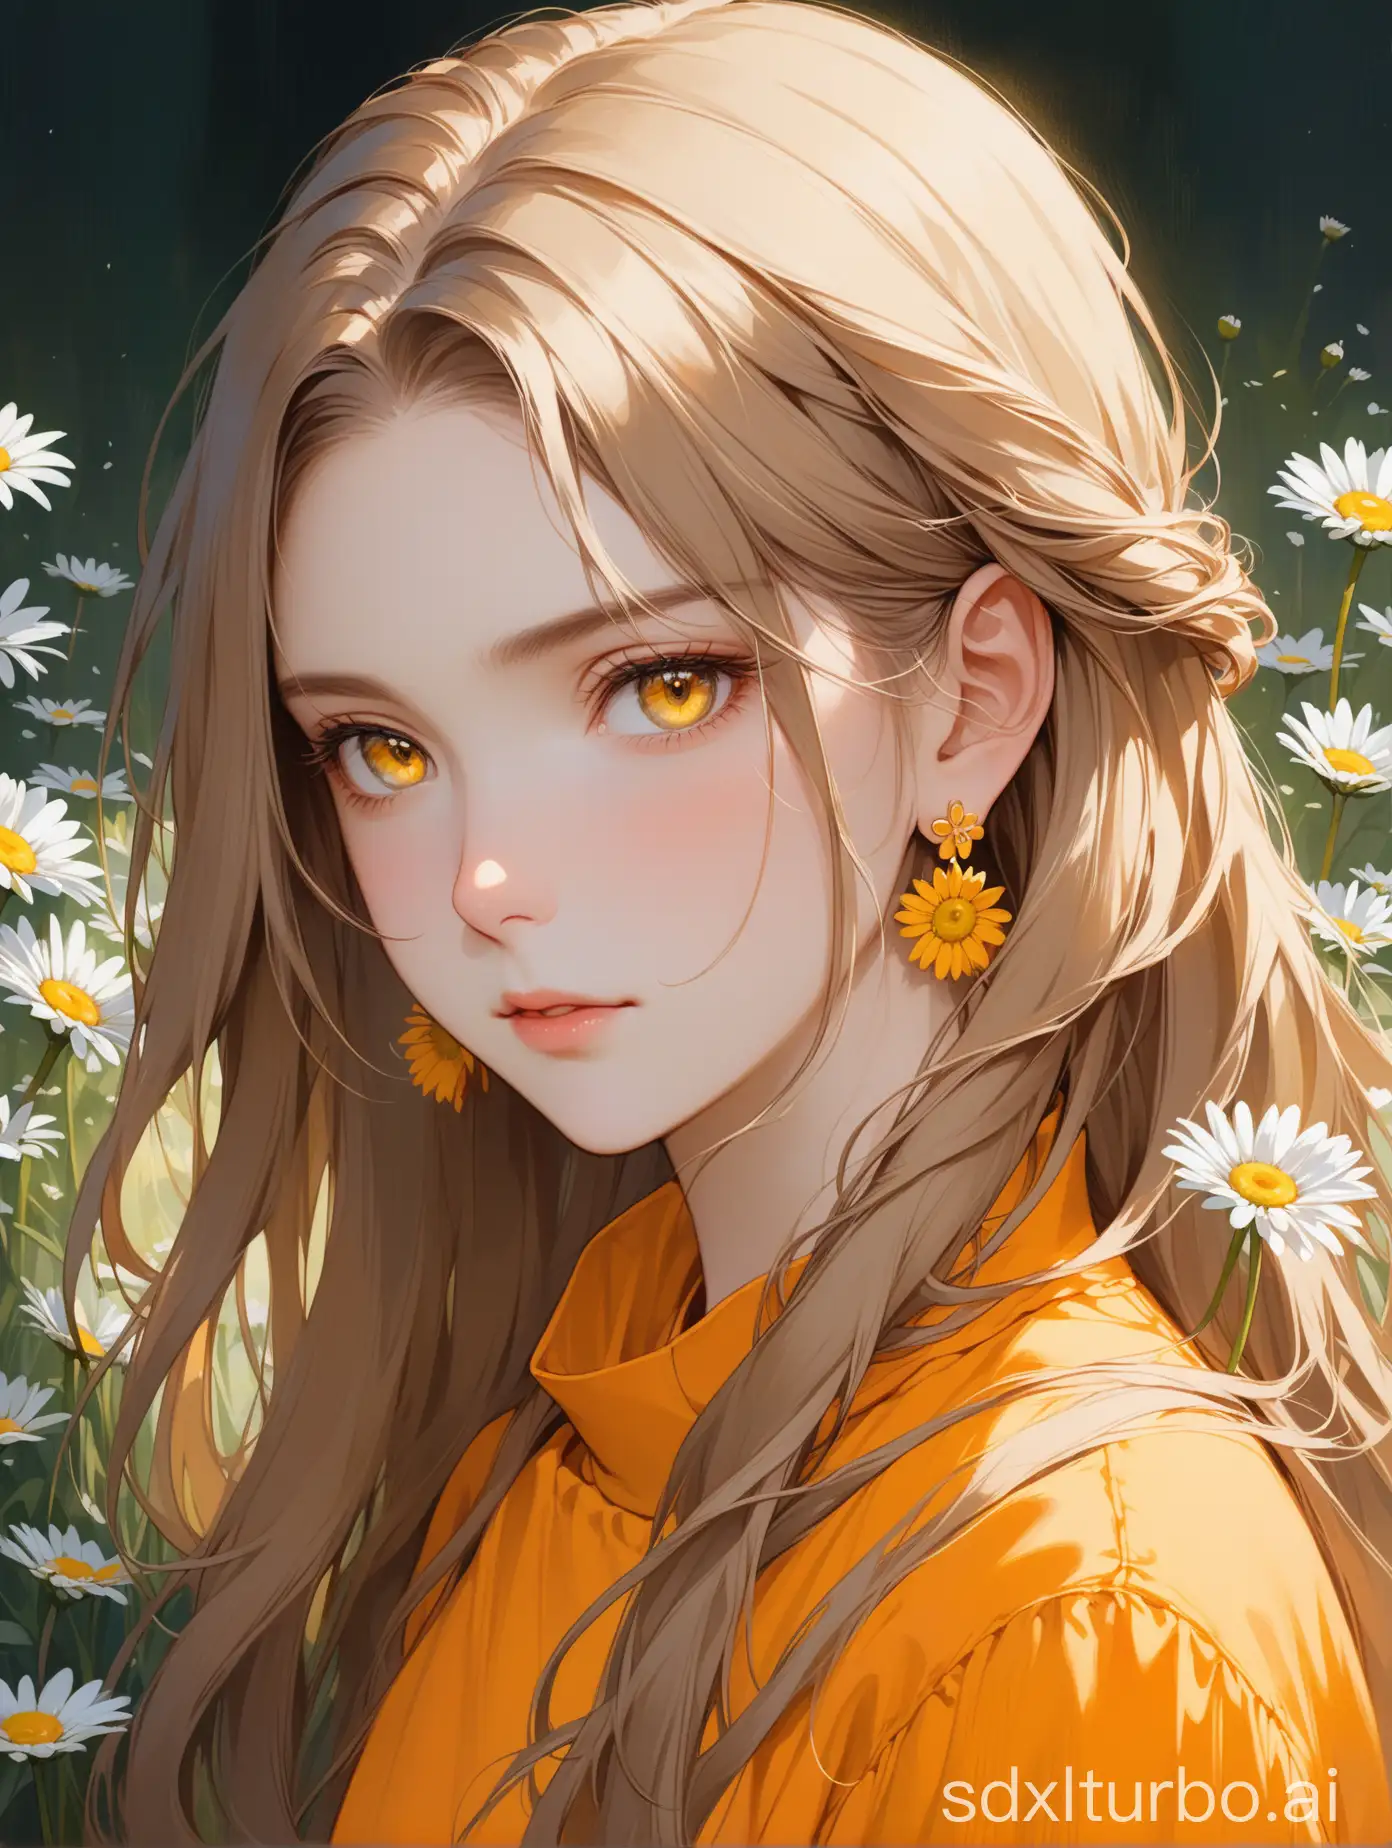 Top quality, masterpiece, a girl, light brown long hair, slightly curled hair, yellow earrings, neckband, (orange clothing), (exquisite depiction of hair), (exquisite depiction of yellow eyes), (exquisite depiction of facial features), solo, (daisies), portrait description, sense of brokenness